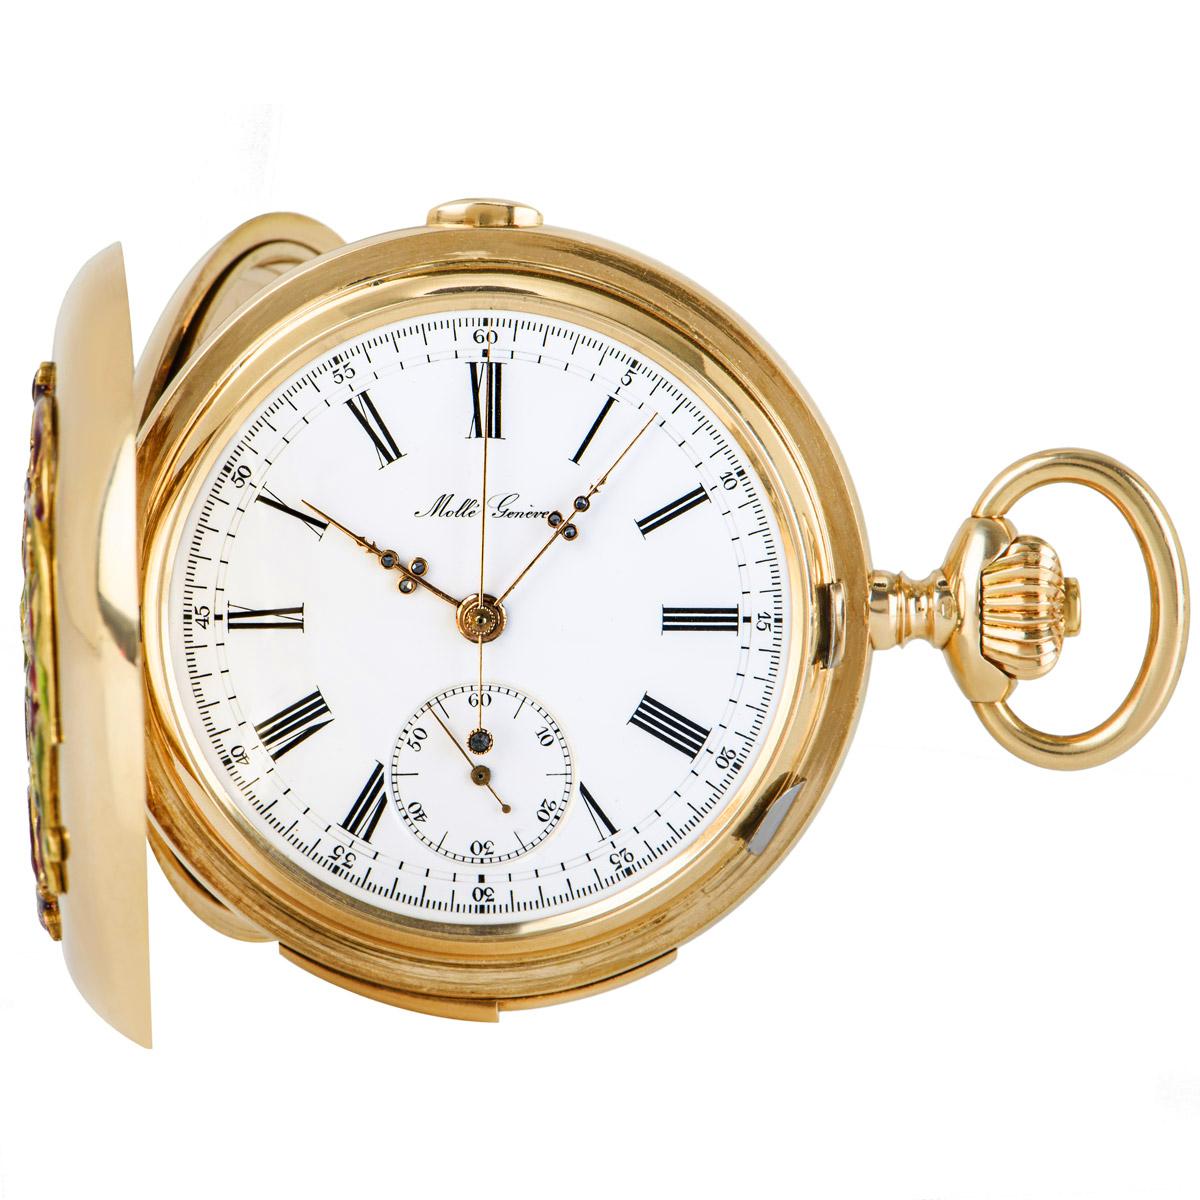 MOLLE Genève 14ct rose gold heavy full hunter quarter repeater chronograph enameled pocket watch, C1890. Made for the Russian Market.

Dial: The perfect white Roman numeral enamel dial with outer Arabic minute track signed MOLLE Genève. The original